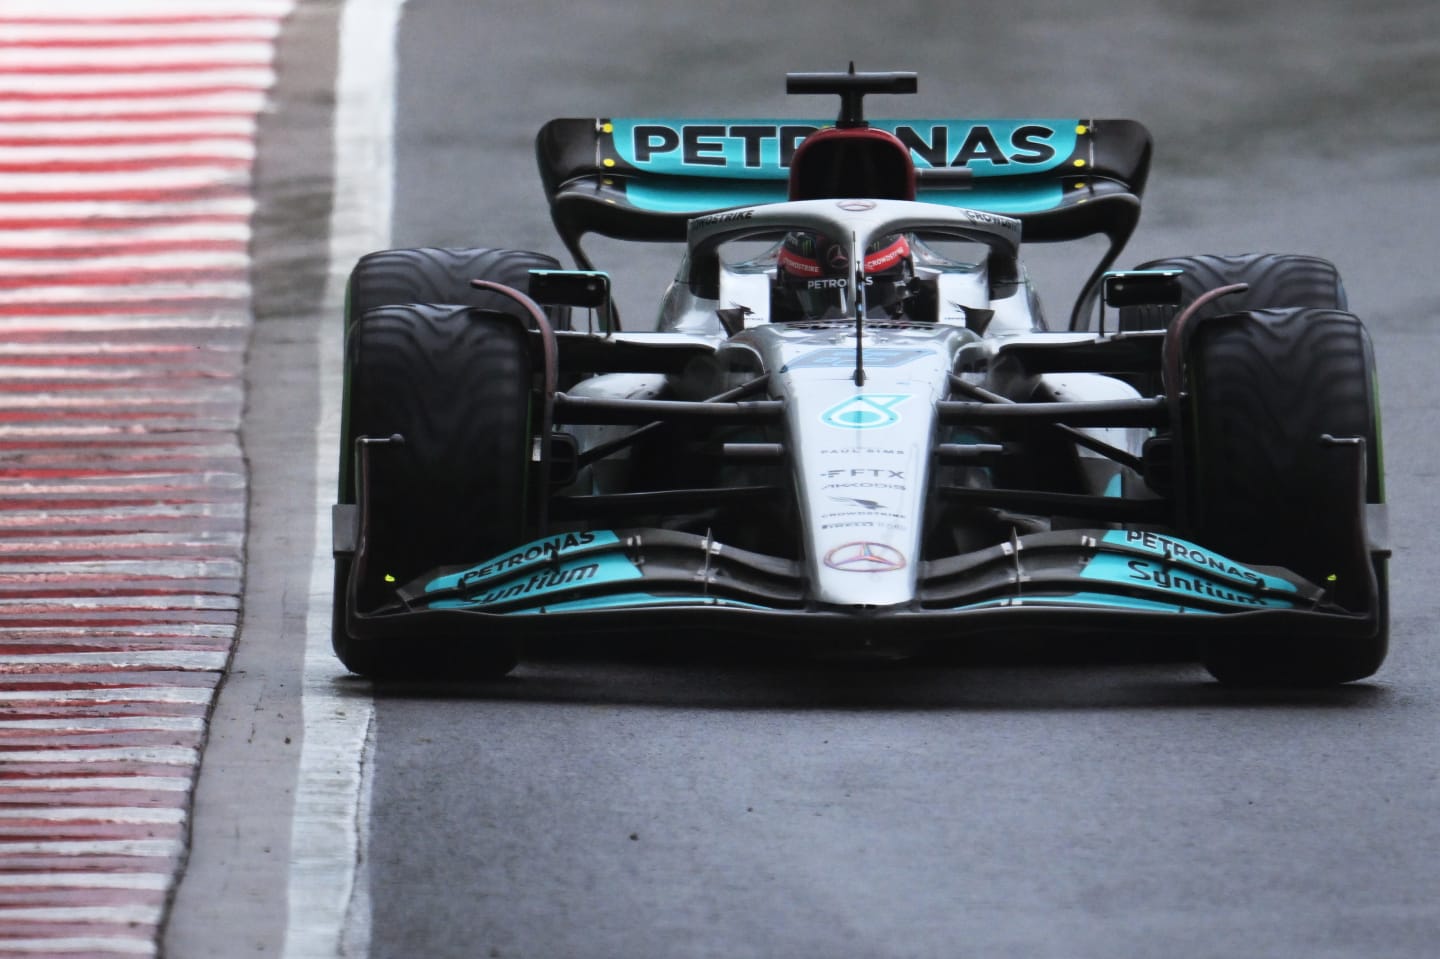 MONTREAL, QUEBEC - JUNE 18: George Russell of Great Britain driving the (63) Mercedes AMG Petronas F1 Team W13 on track during qualifying ahead of the F1 Grand Prix of Canada at Circuit Gilles Villeneuve on June 18, 2022 in Montreal, Quebec. (Photo by Clive Mason/Getty Images)